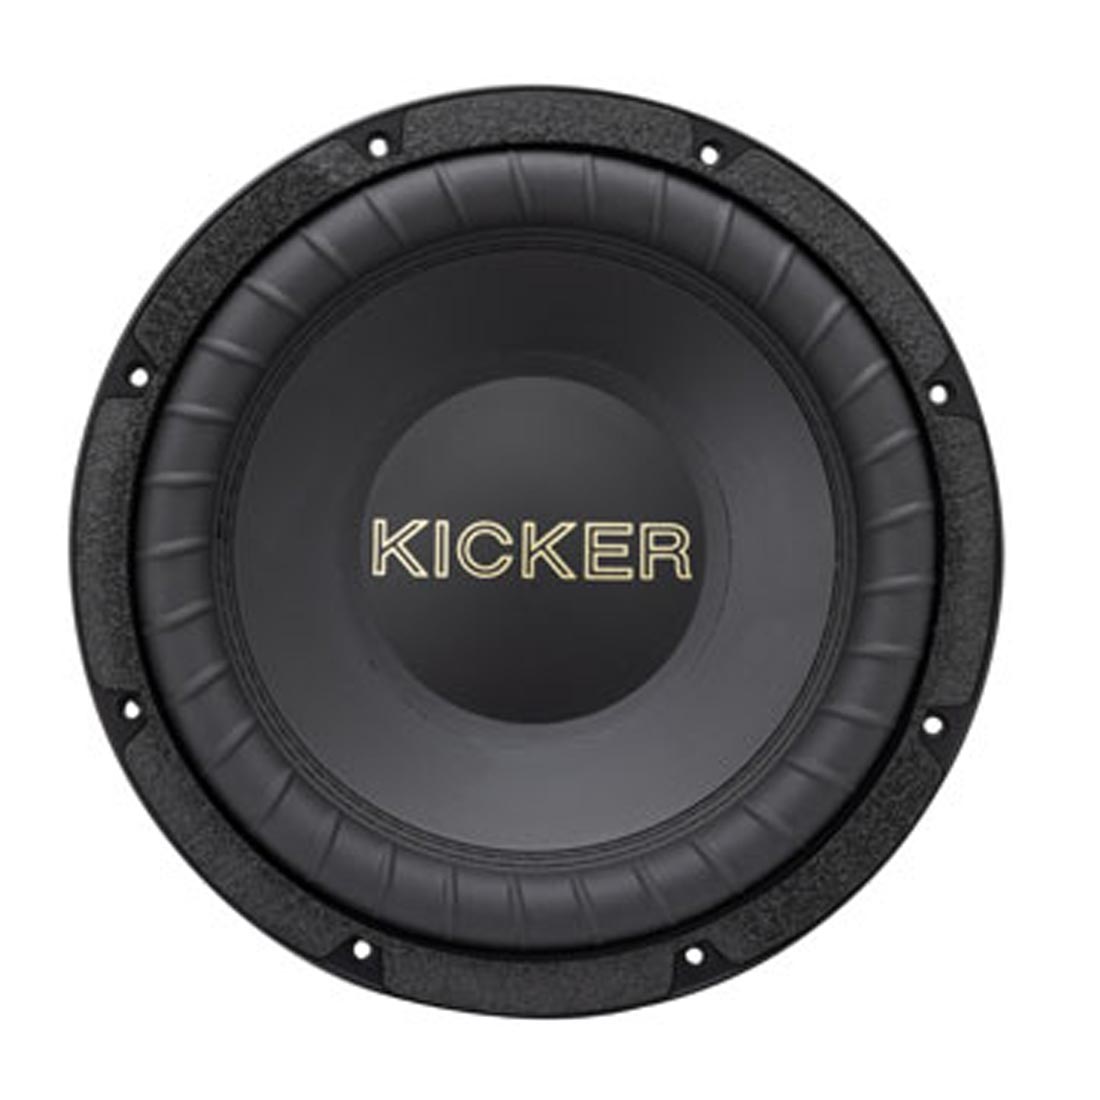 Kicker 50GOLD104 50th Anniversary 10" Competition Gold 4-Ohm Subwoofer